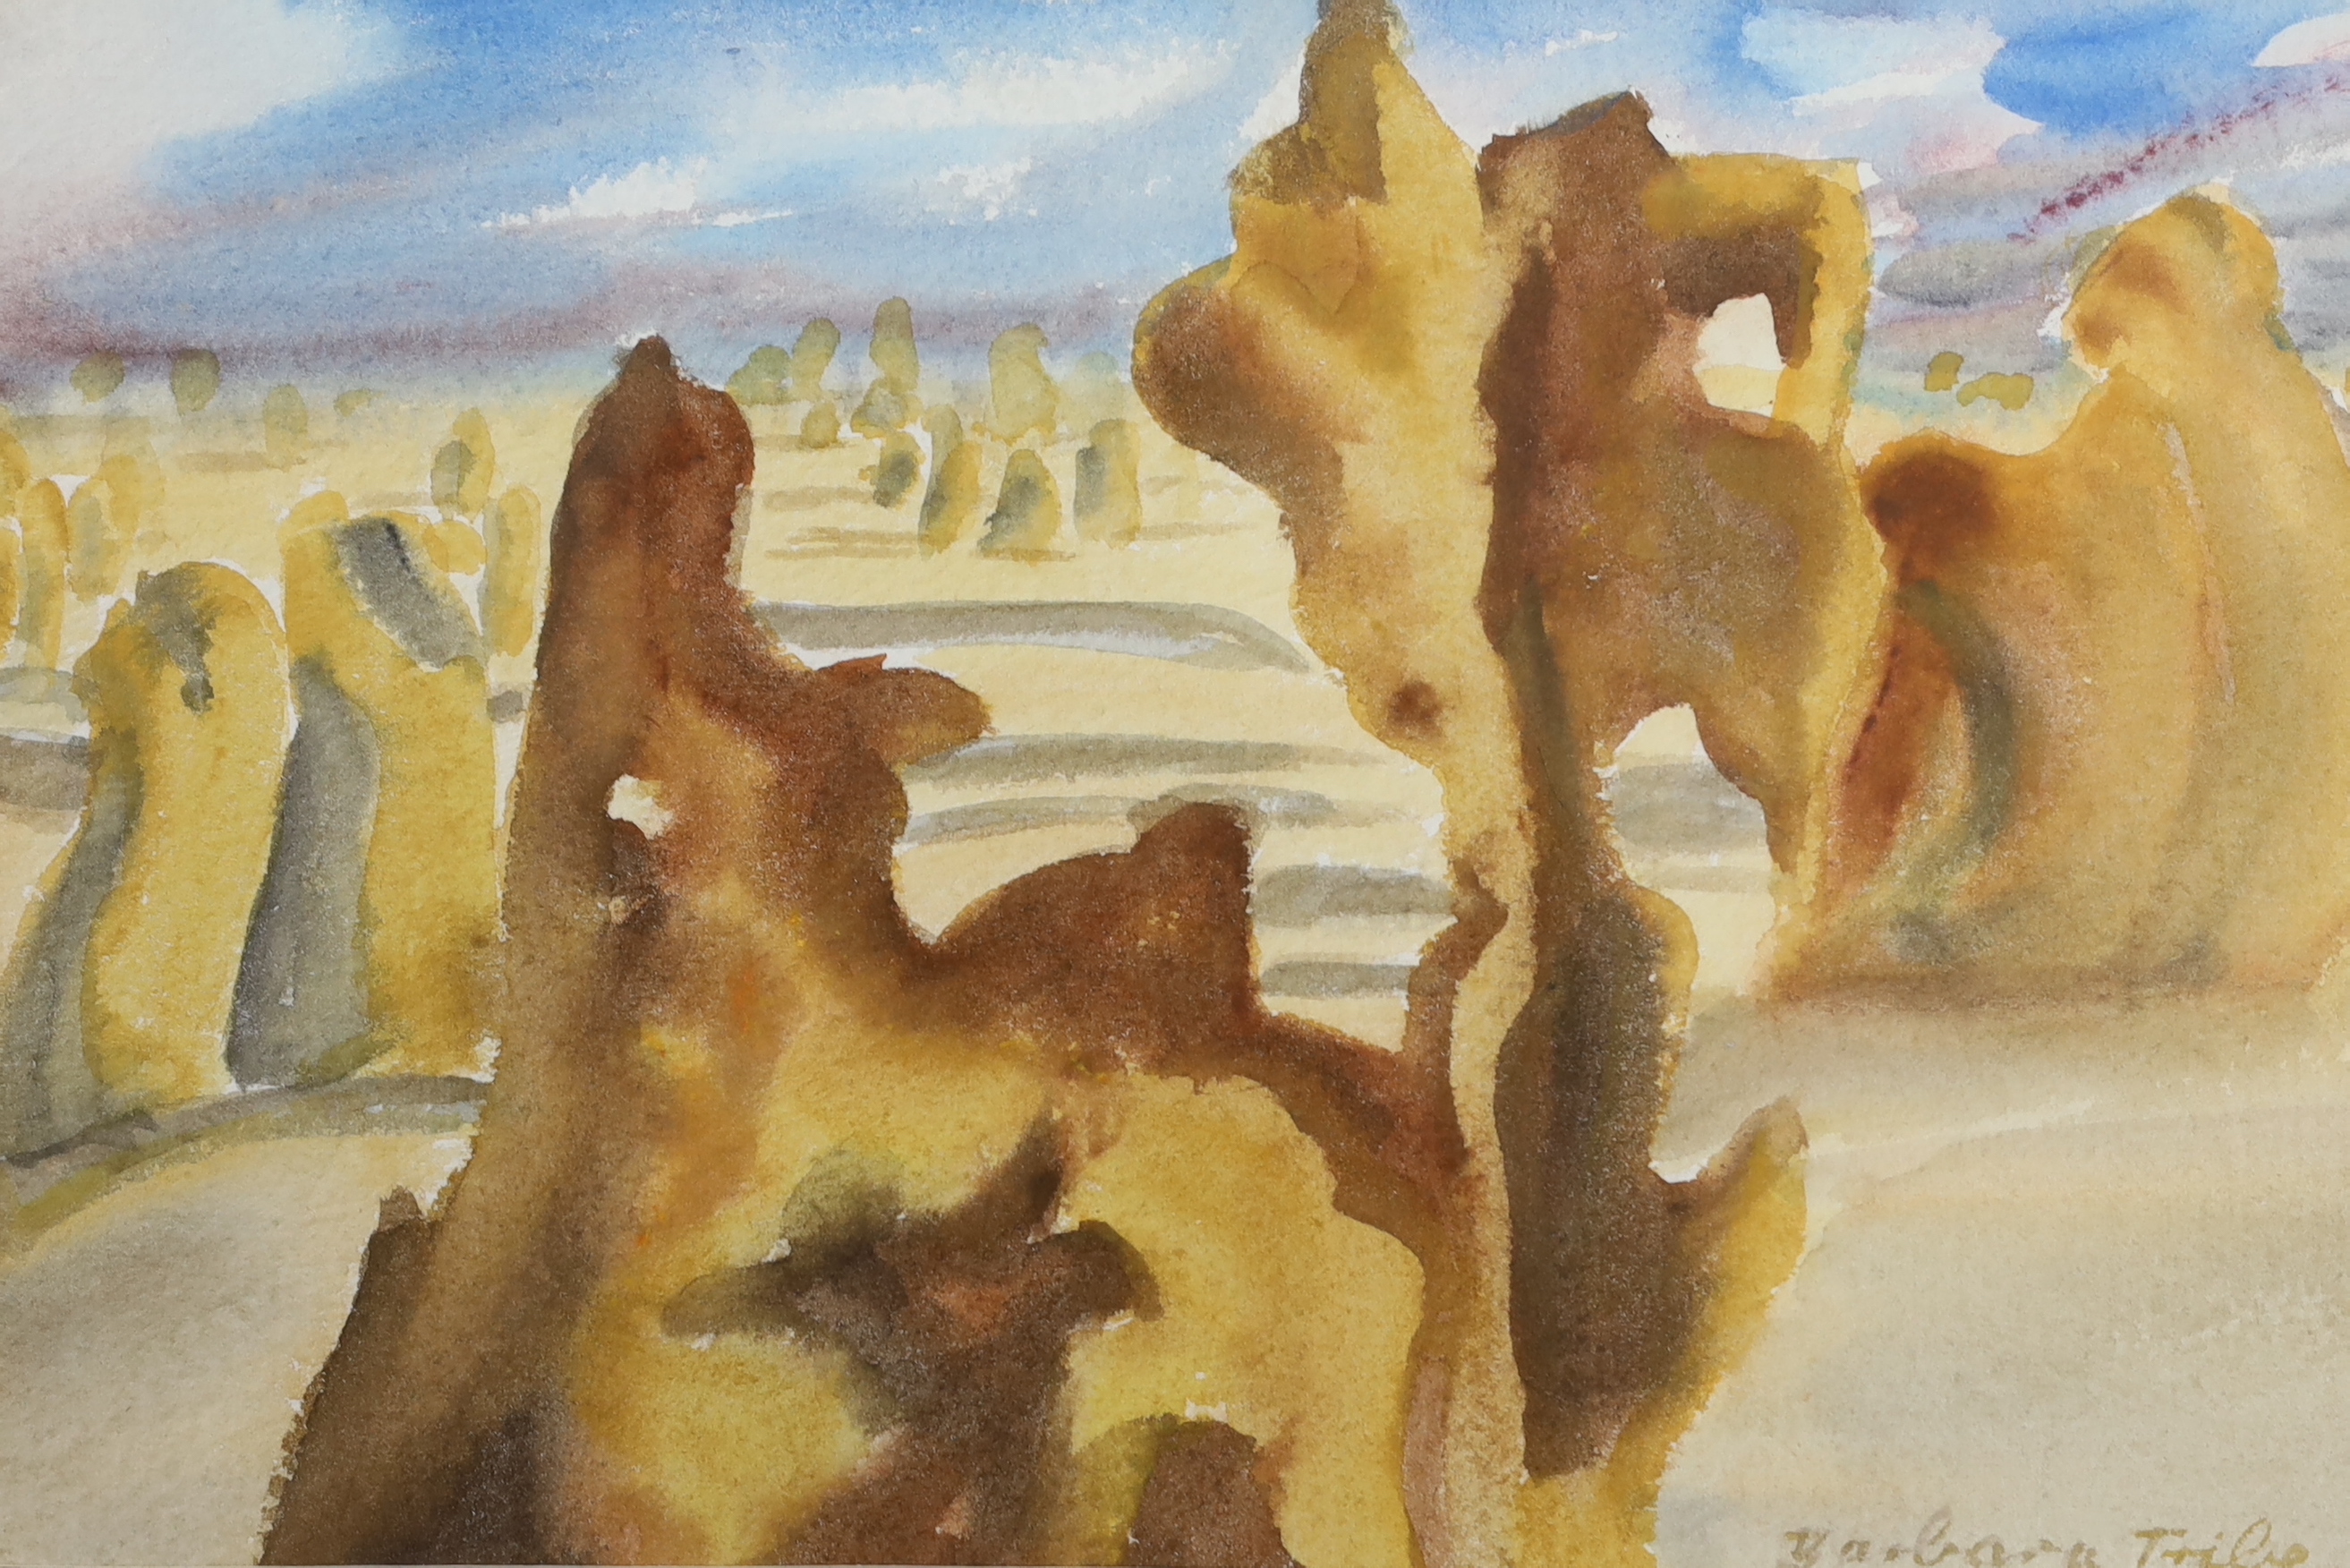 Barbara Tribe (1913-2000), two watercolours, ‘Pillars in the Sand, Western Australia’ and ‘Snow Santa Rita Mountains, Mexico to Arizona', signed, labels verso, the largest 33cm x 24cm